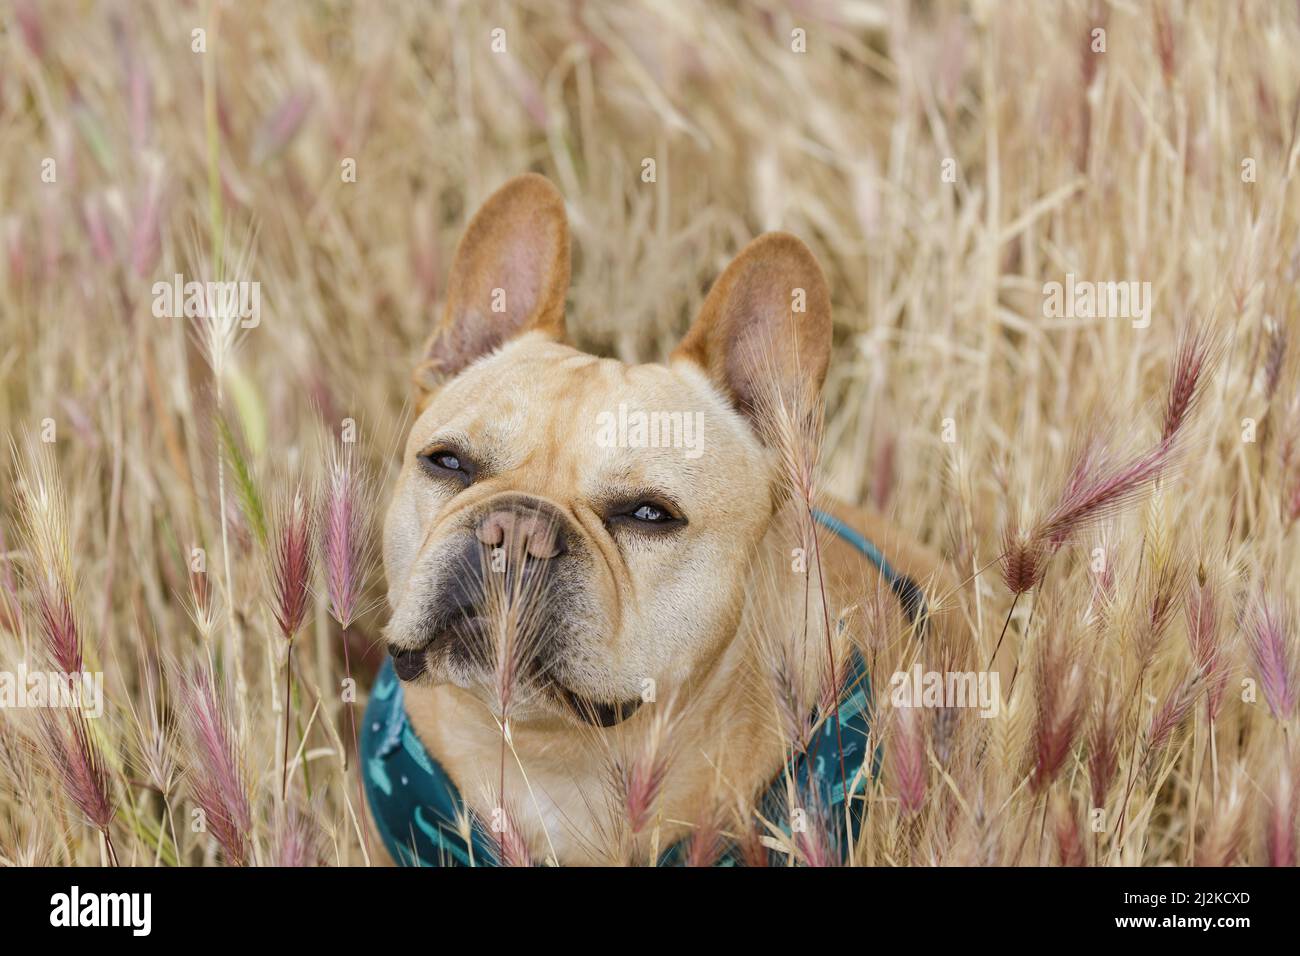 Foxtail plants can be risky for dogs. French Bulldog in Foxtail Field in Northern California. Stock Photo